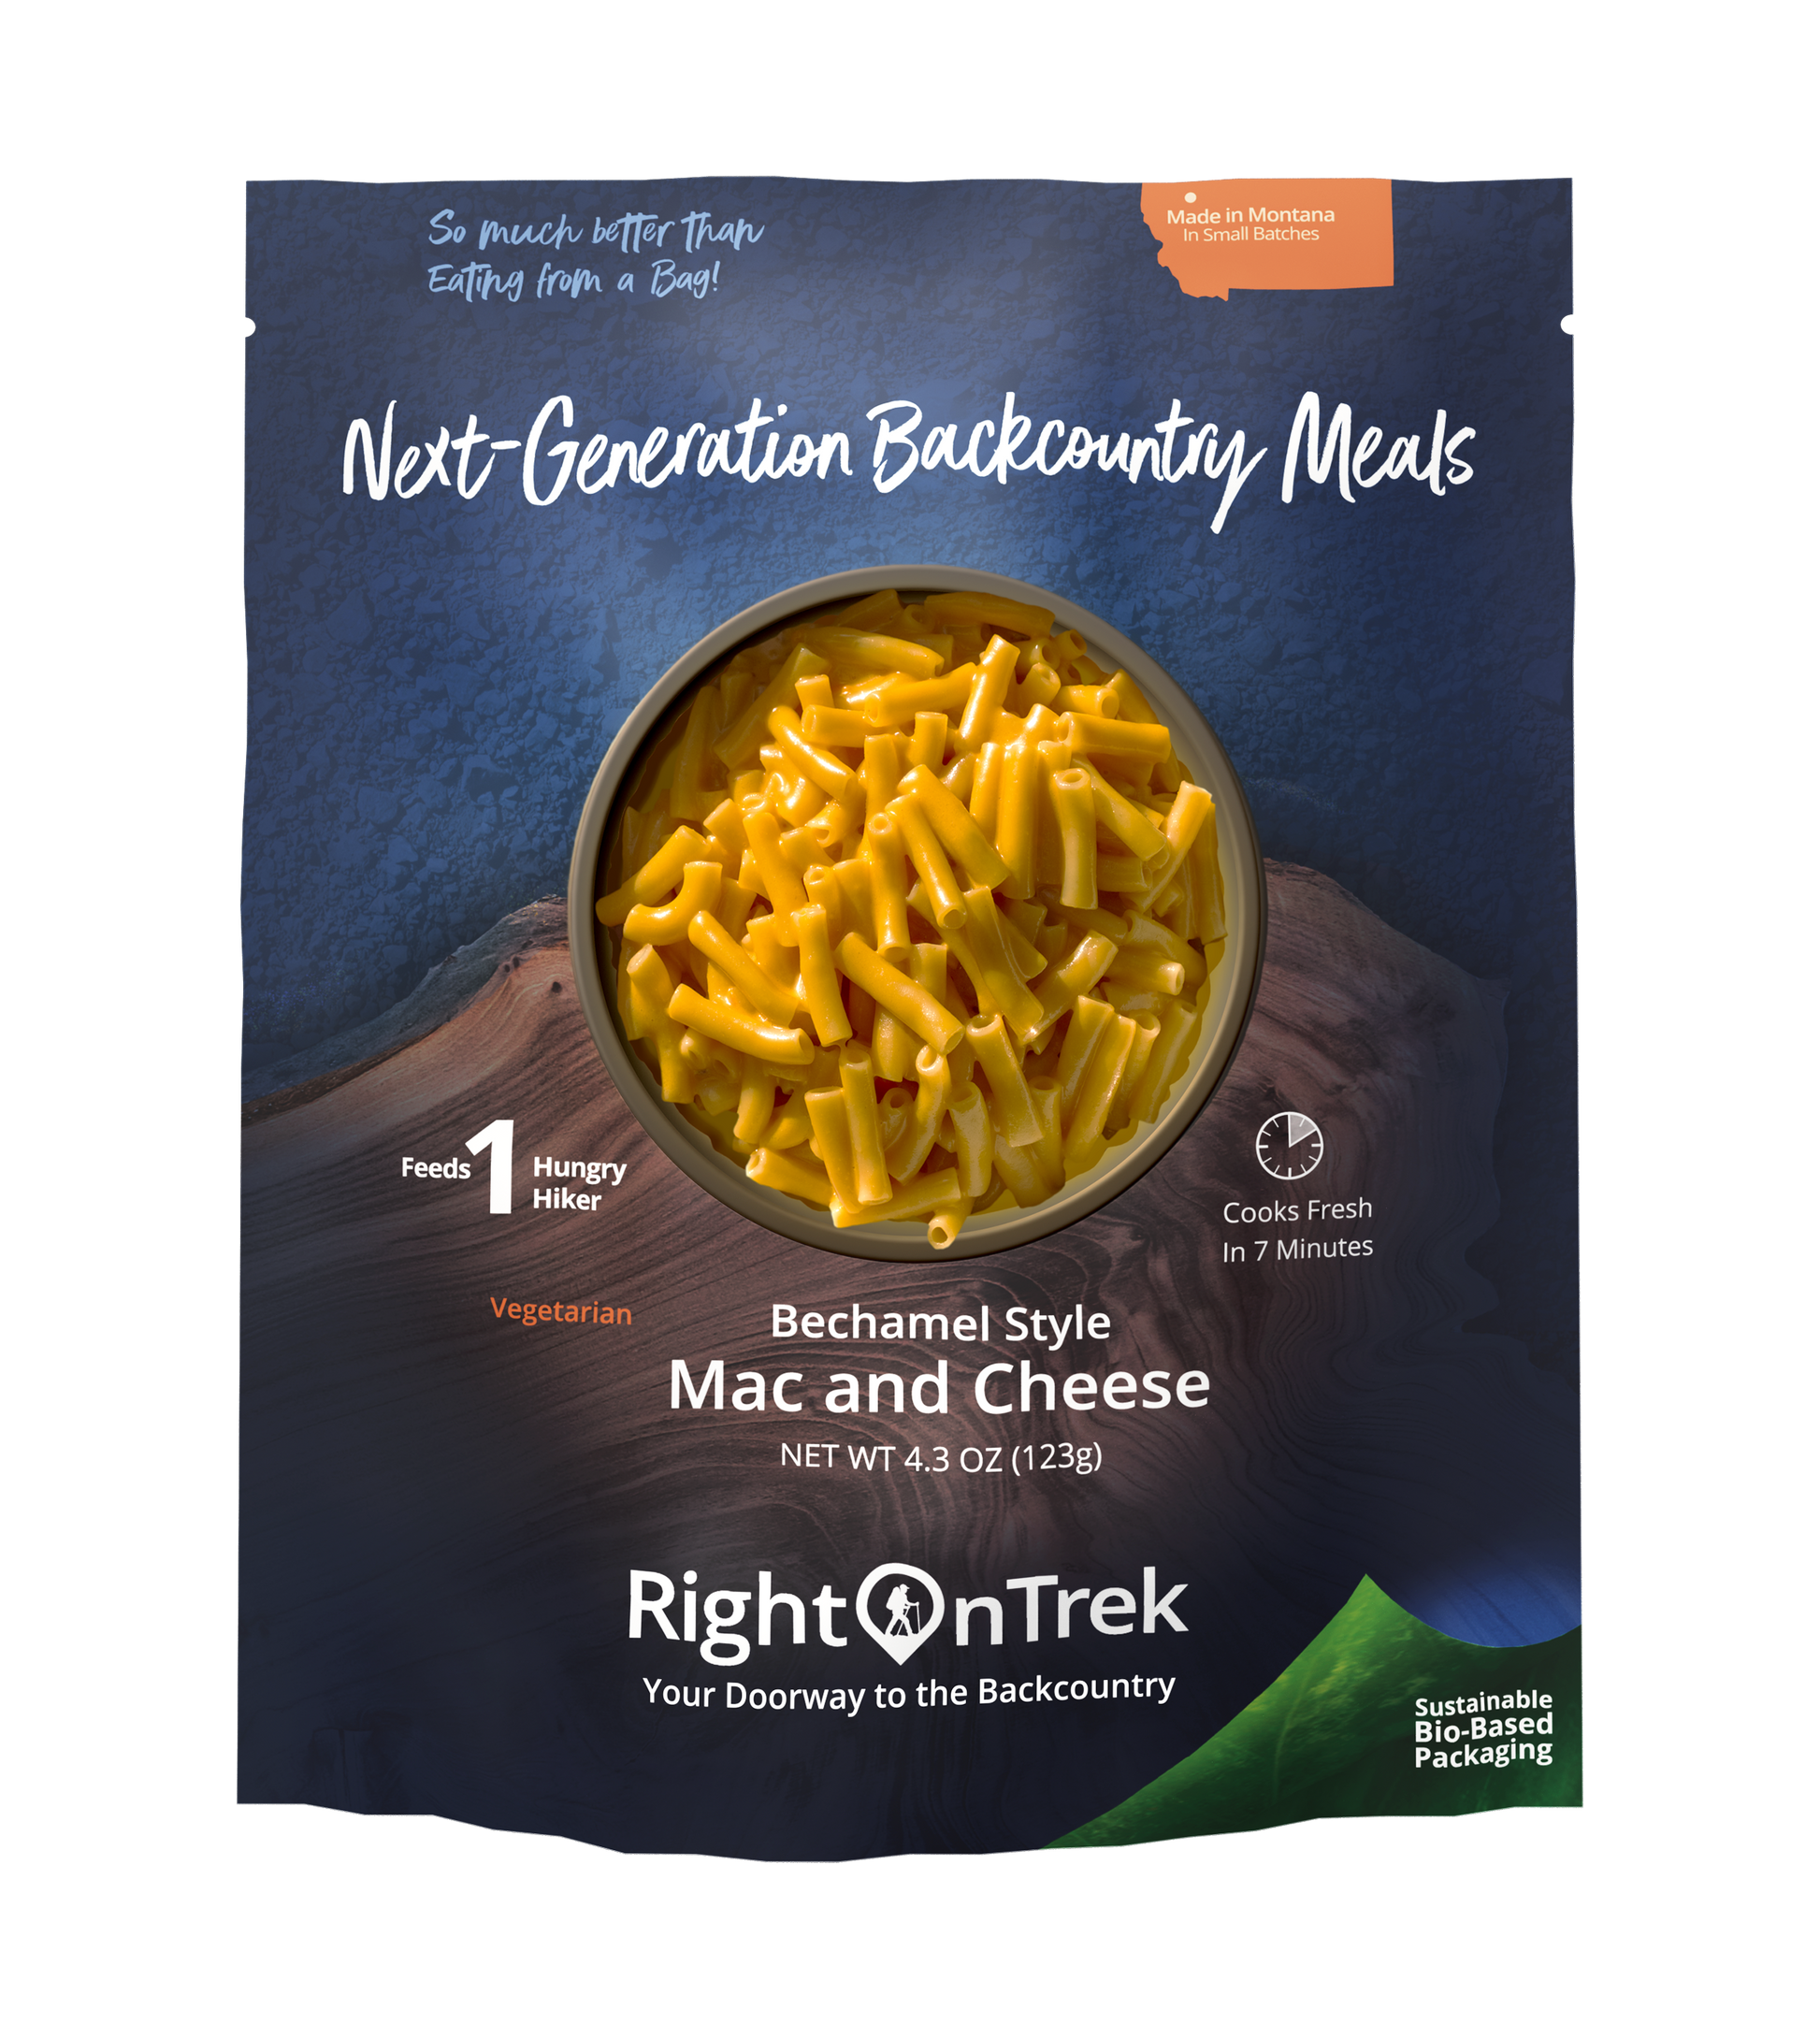 RightOnTrek bechamel style mac and cheese reserved edition feeds 1 person